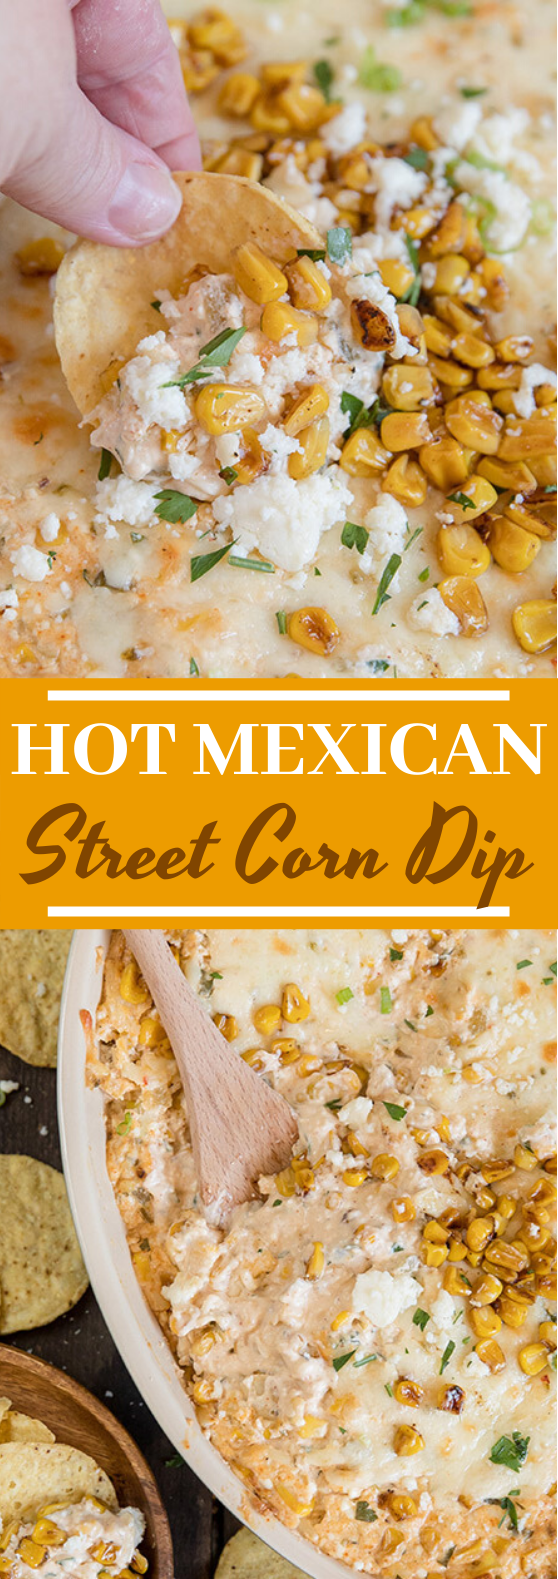 Hot Mexican Corn Dip #appetizers #recipes #partyfood #gameday #easy